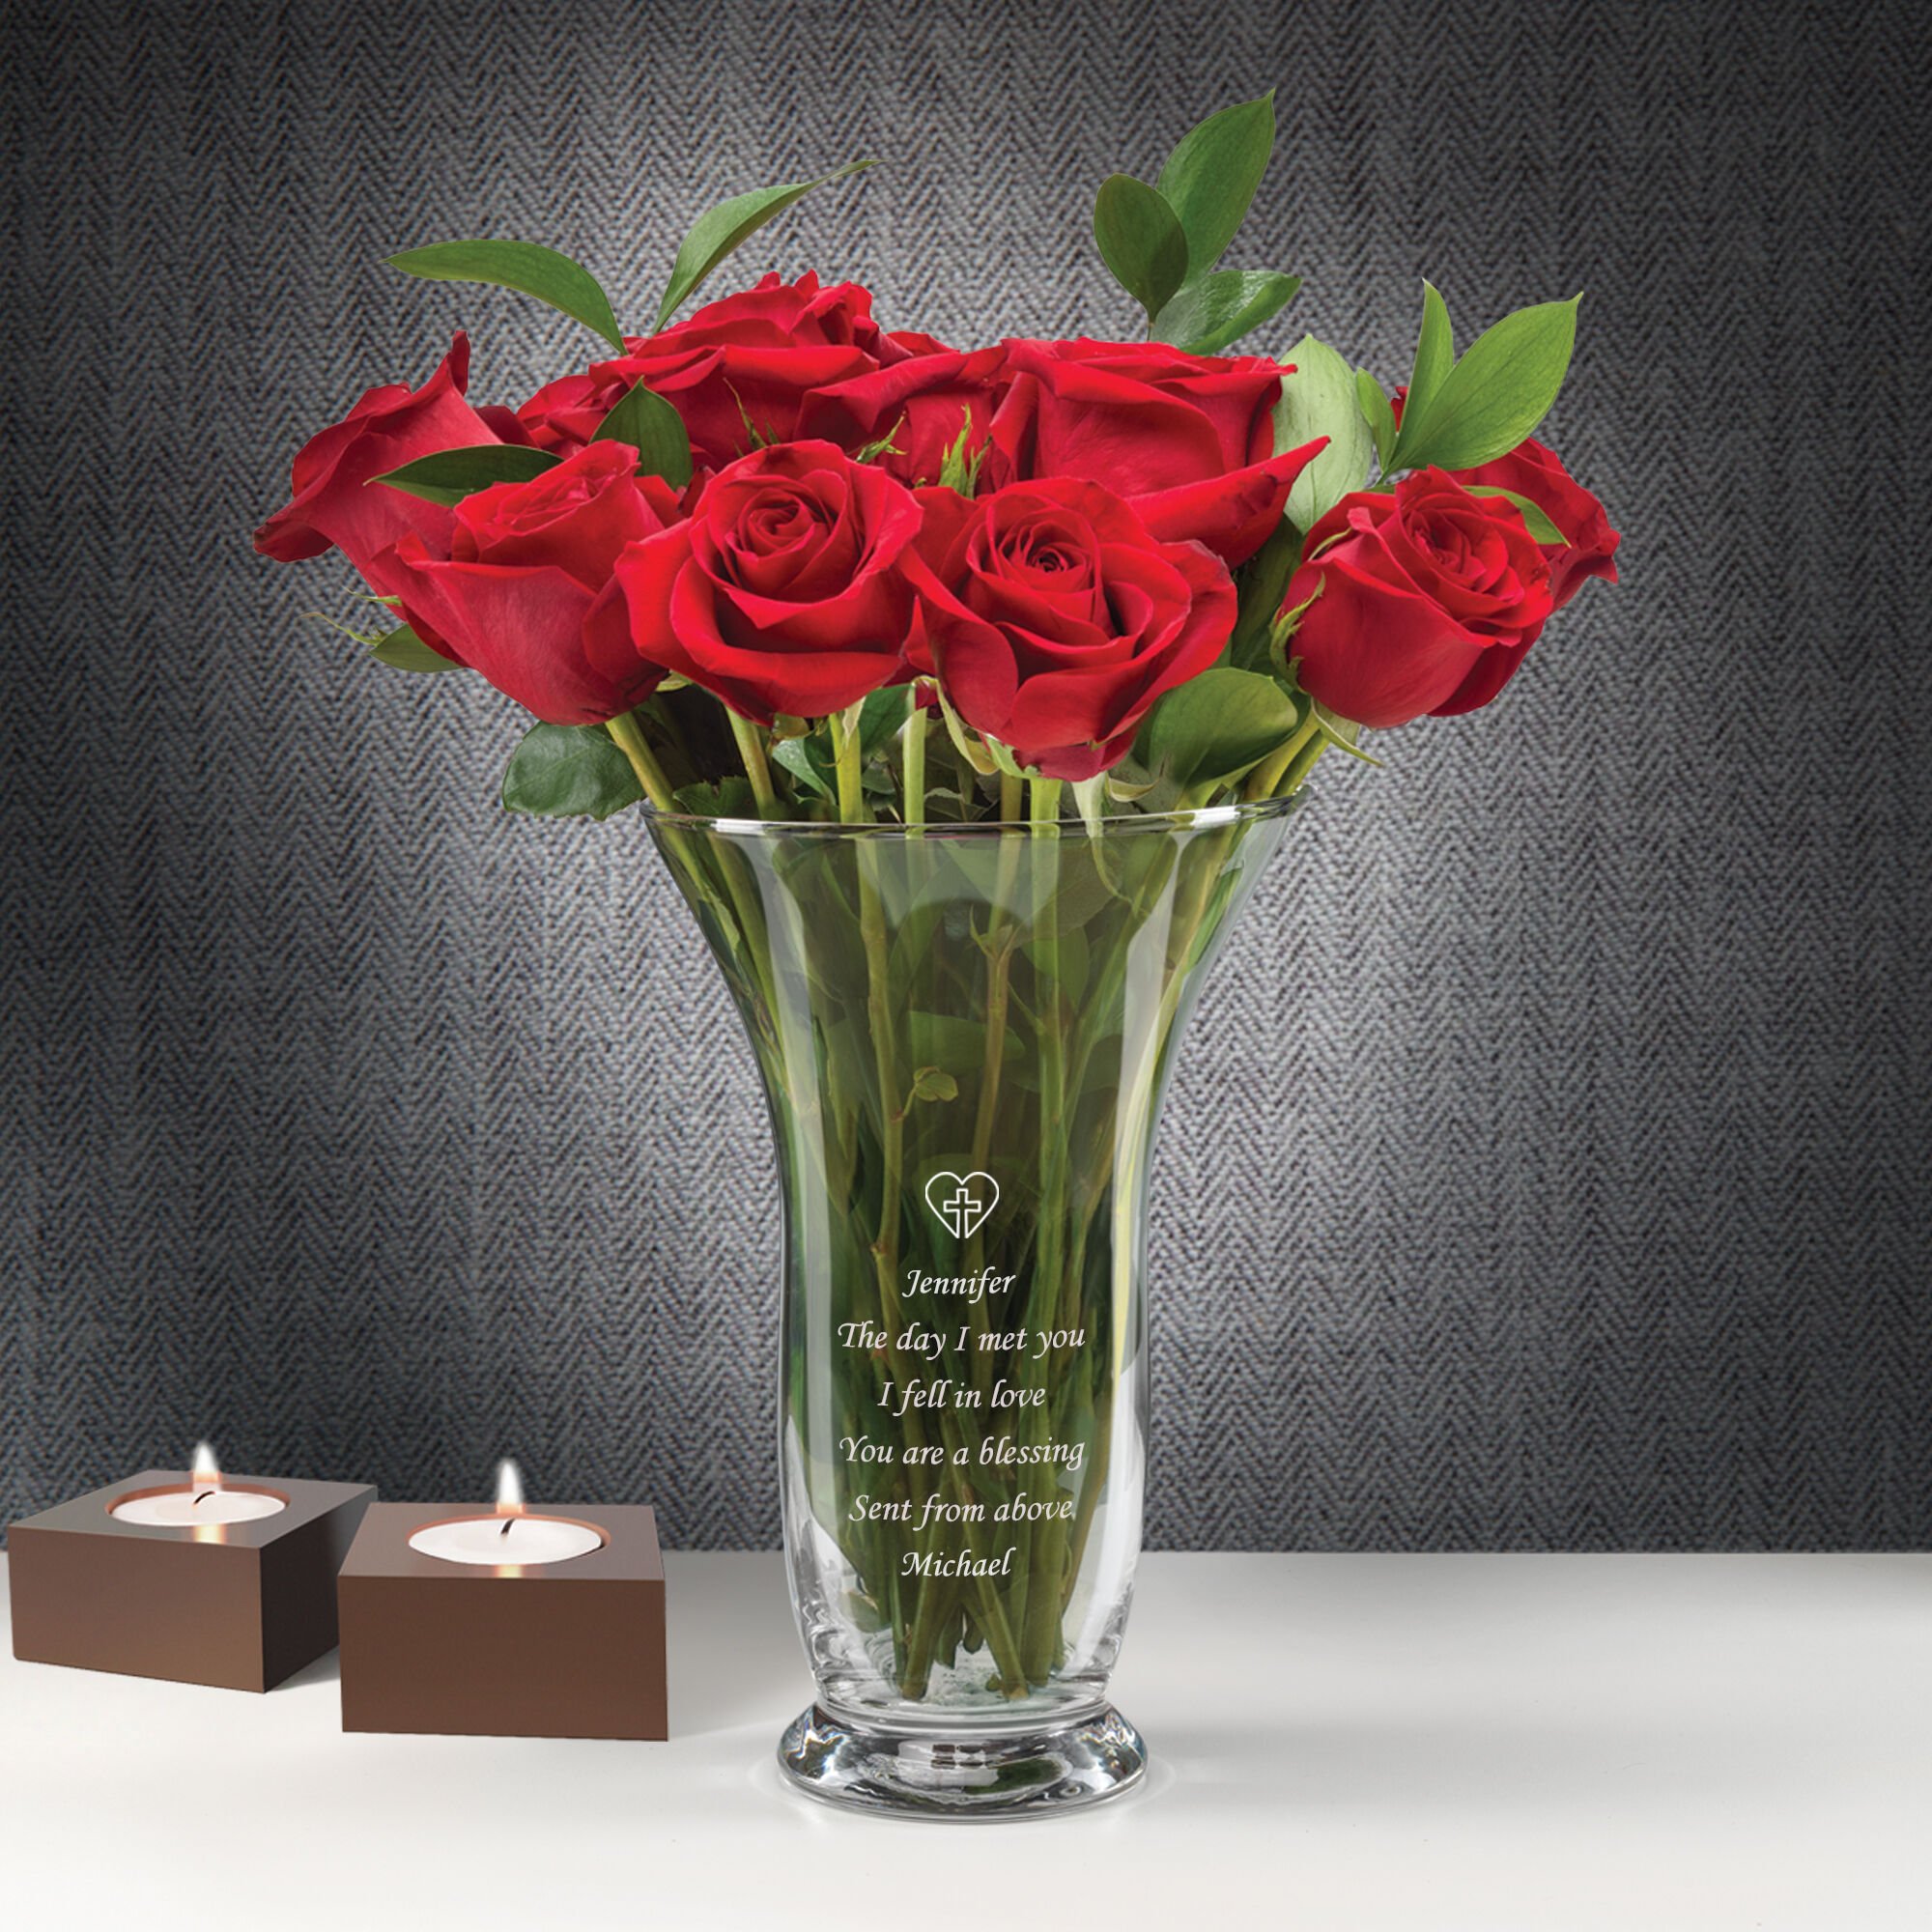 The Personalized Blessing Vase 10157 0034 m room